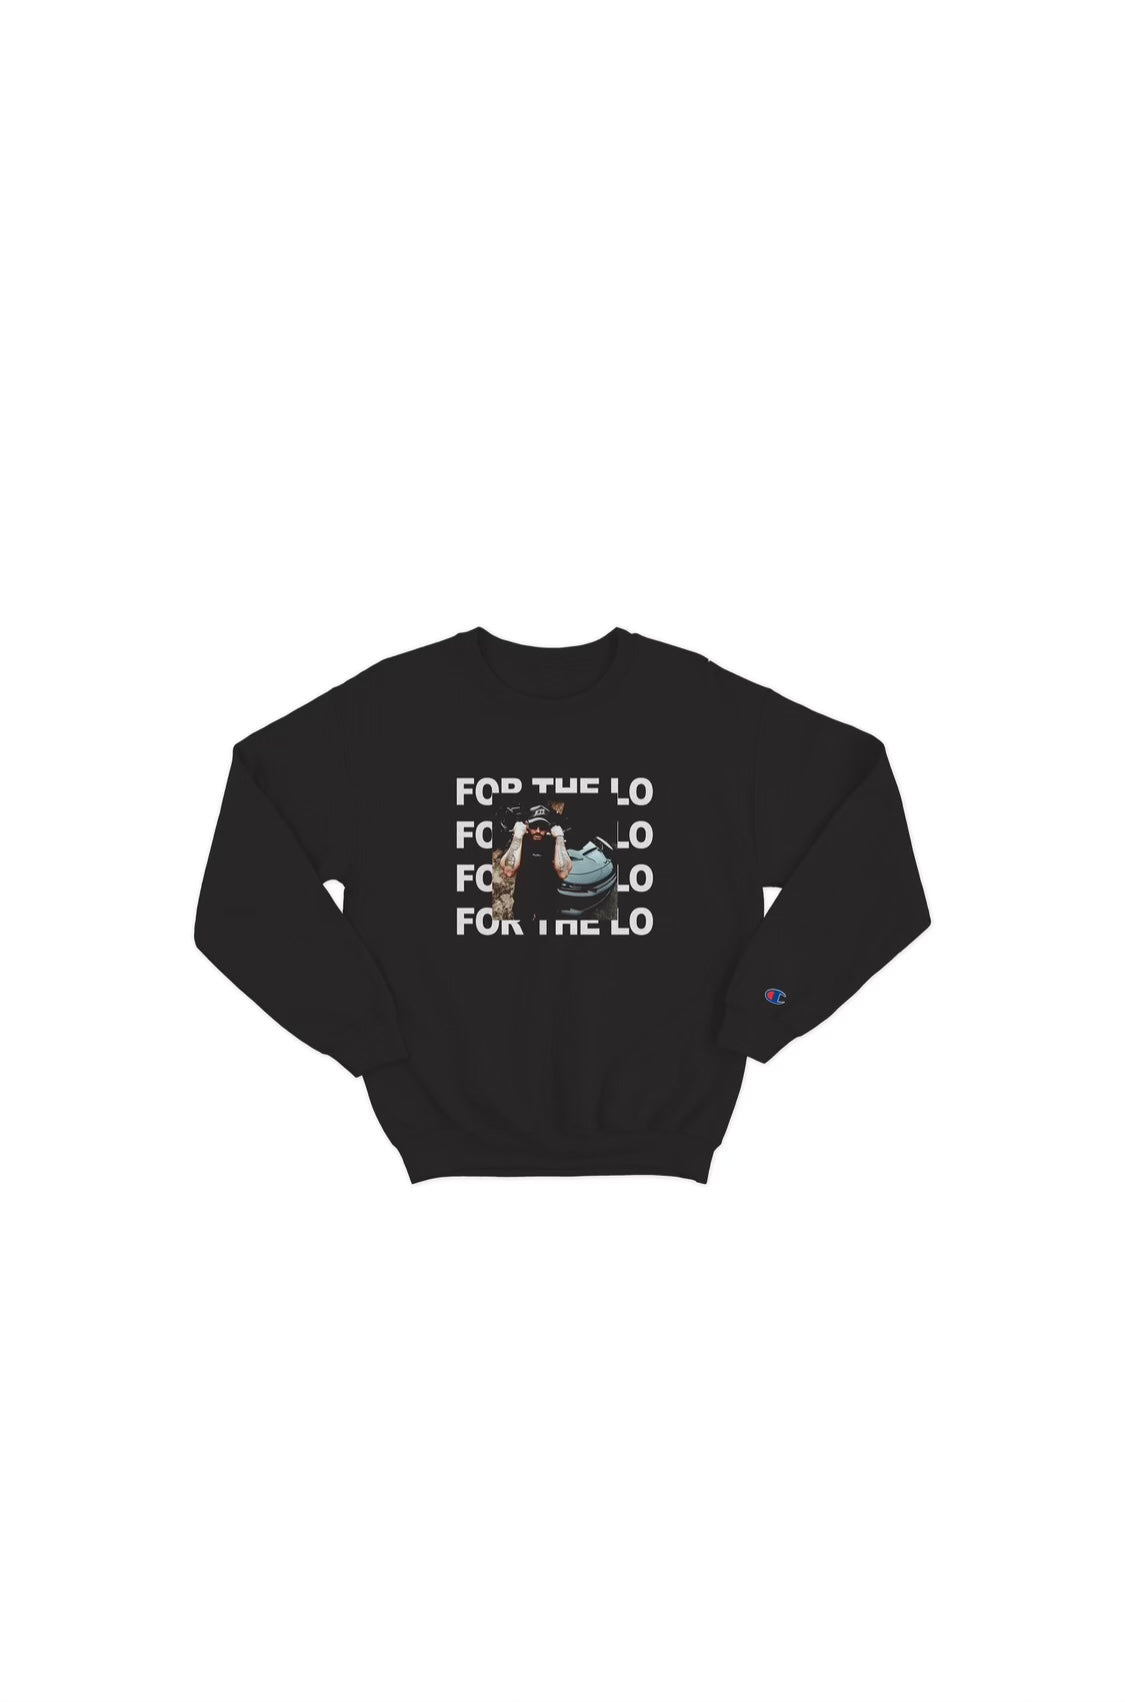 “FOR THE LO.” Hoodie